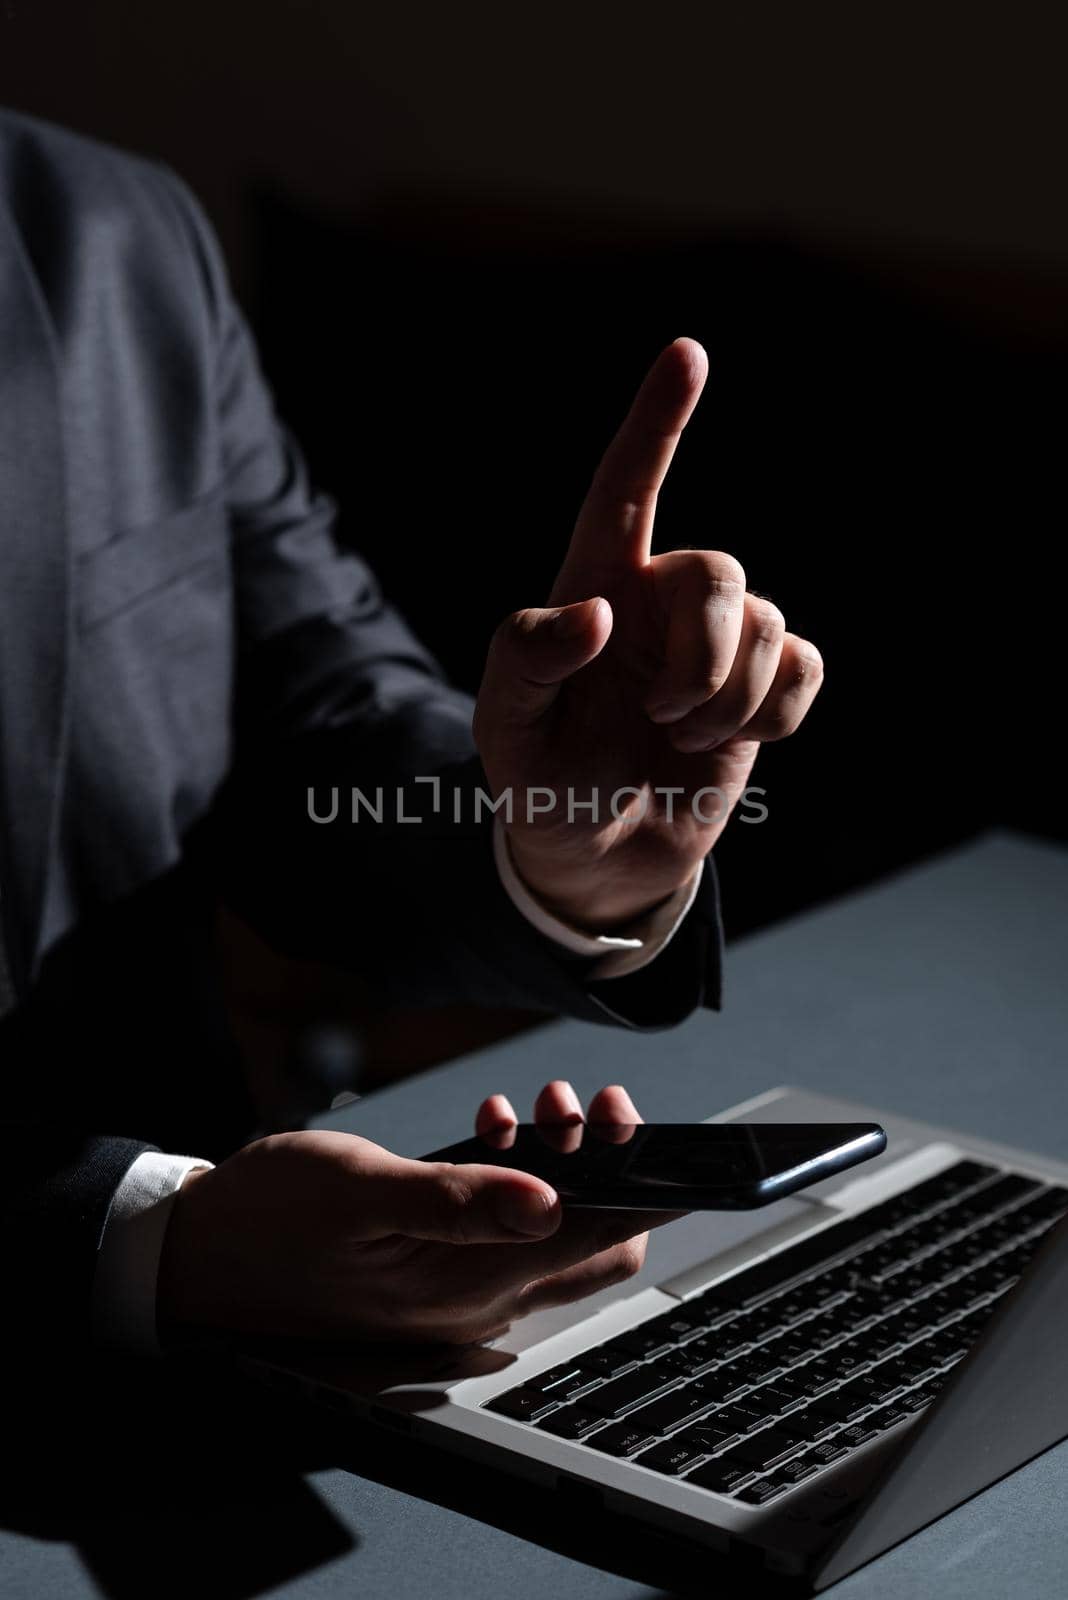 Man Holding Mobile Phone In Hand And Pointing With One Finger On Data.